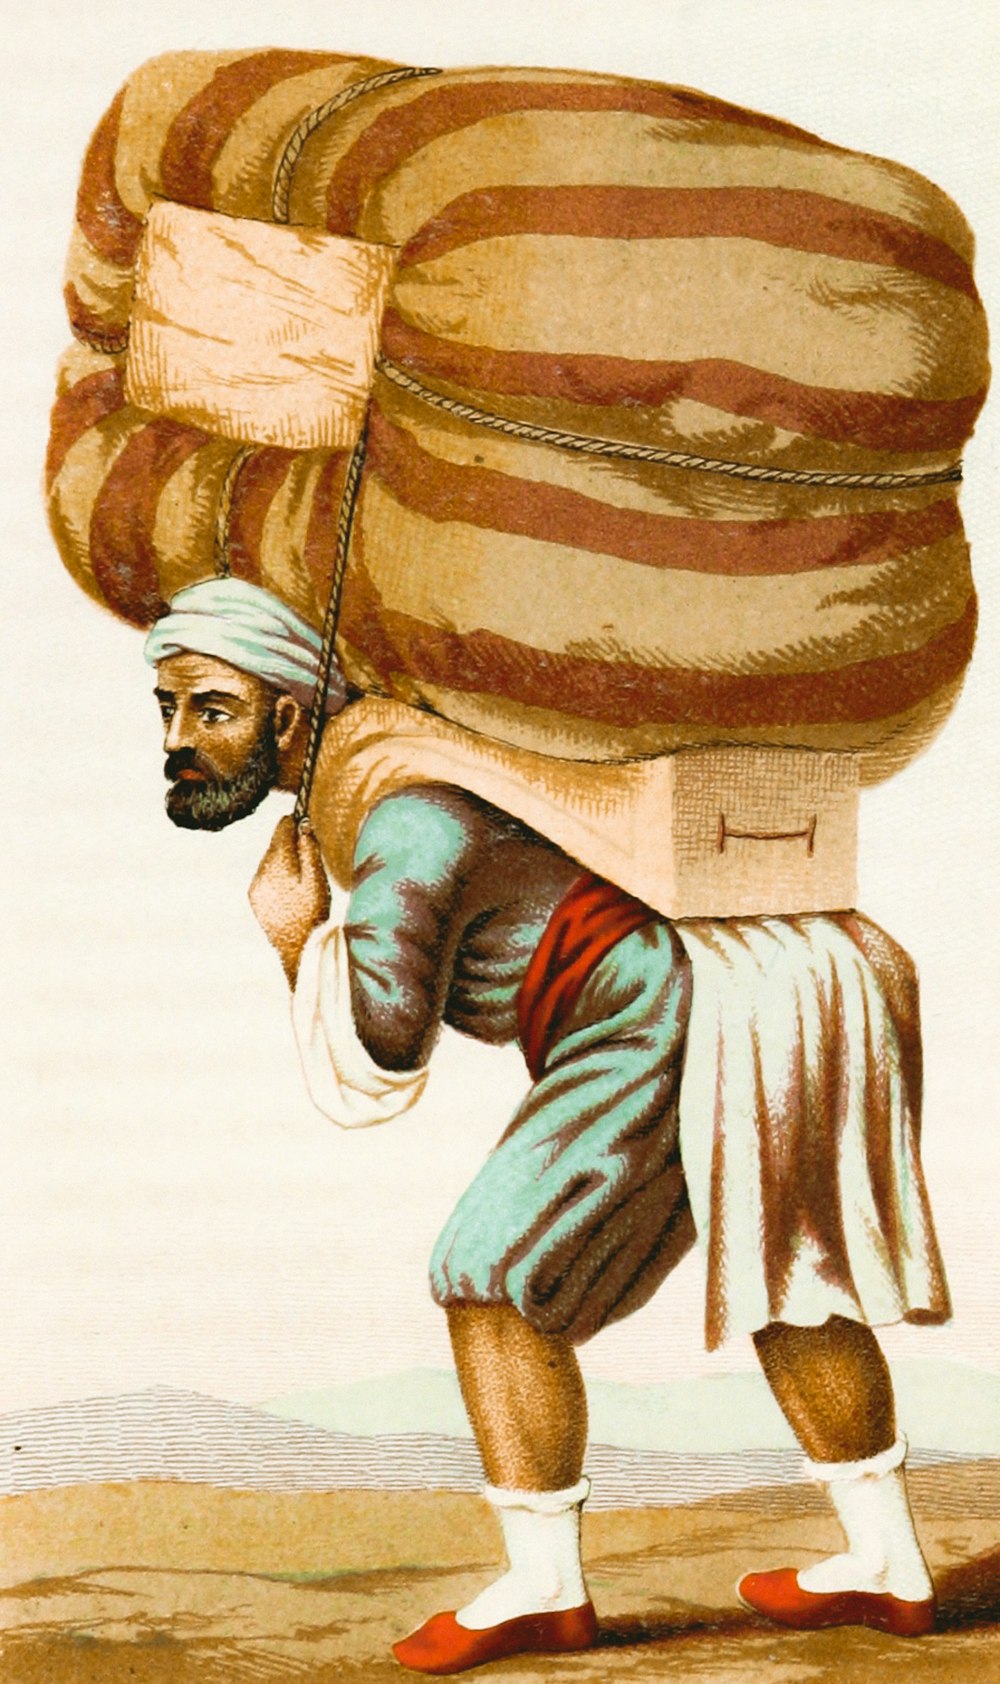 a drawing of a man carrying a large sack